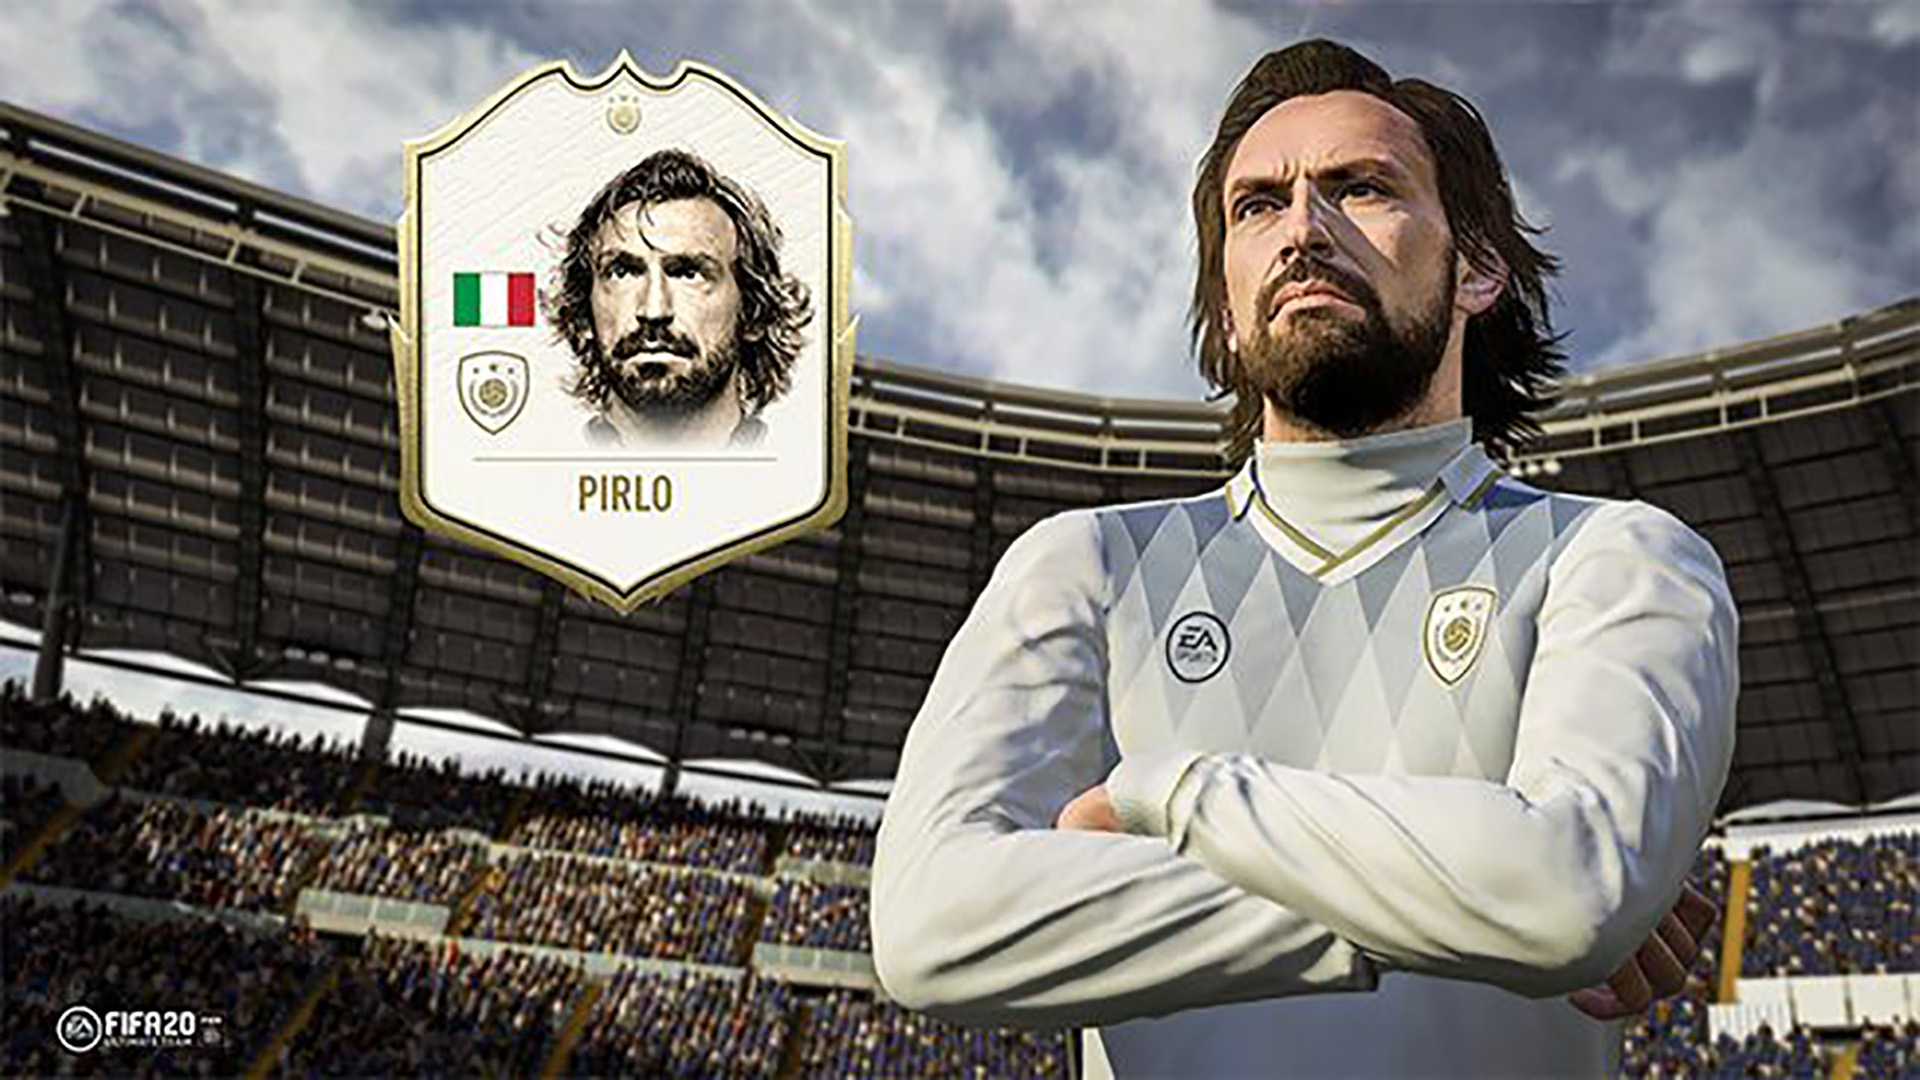 FIFA 20 Icons vs PES 2020 Legends: Which past players are in the games